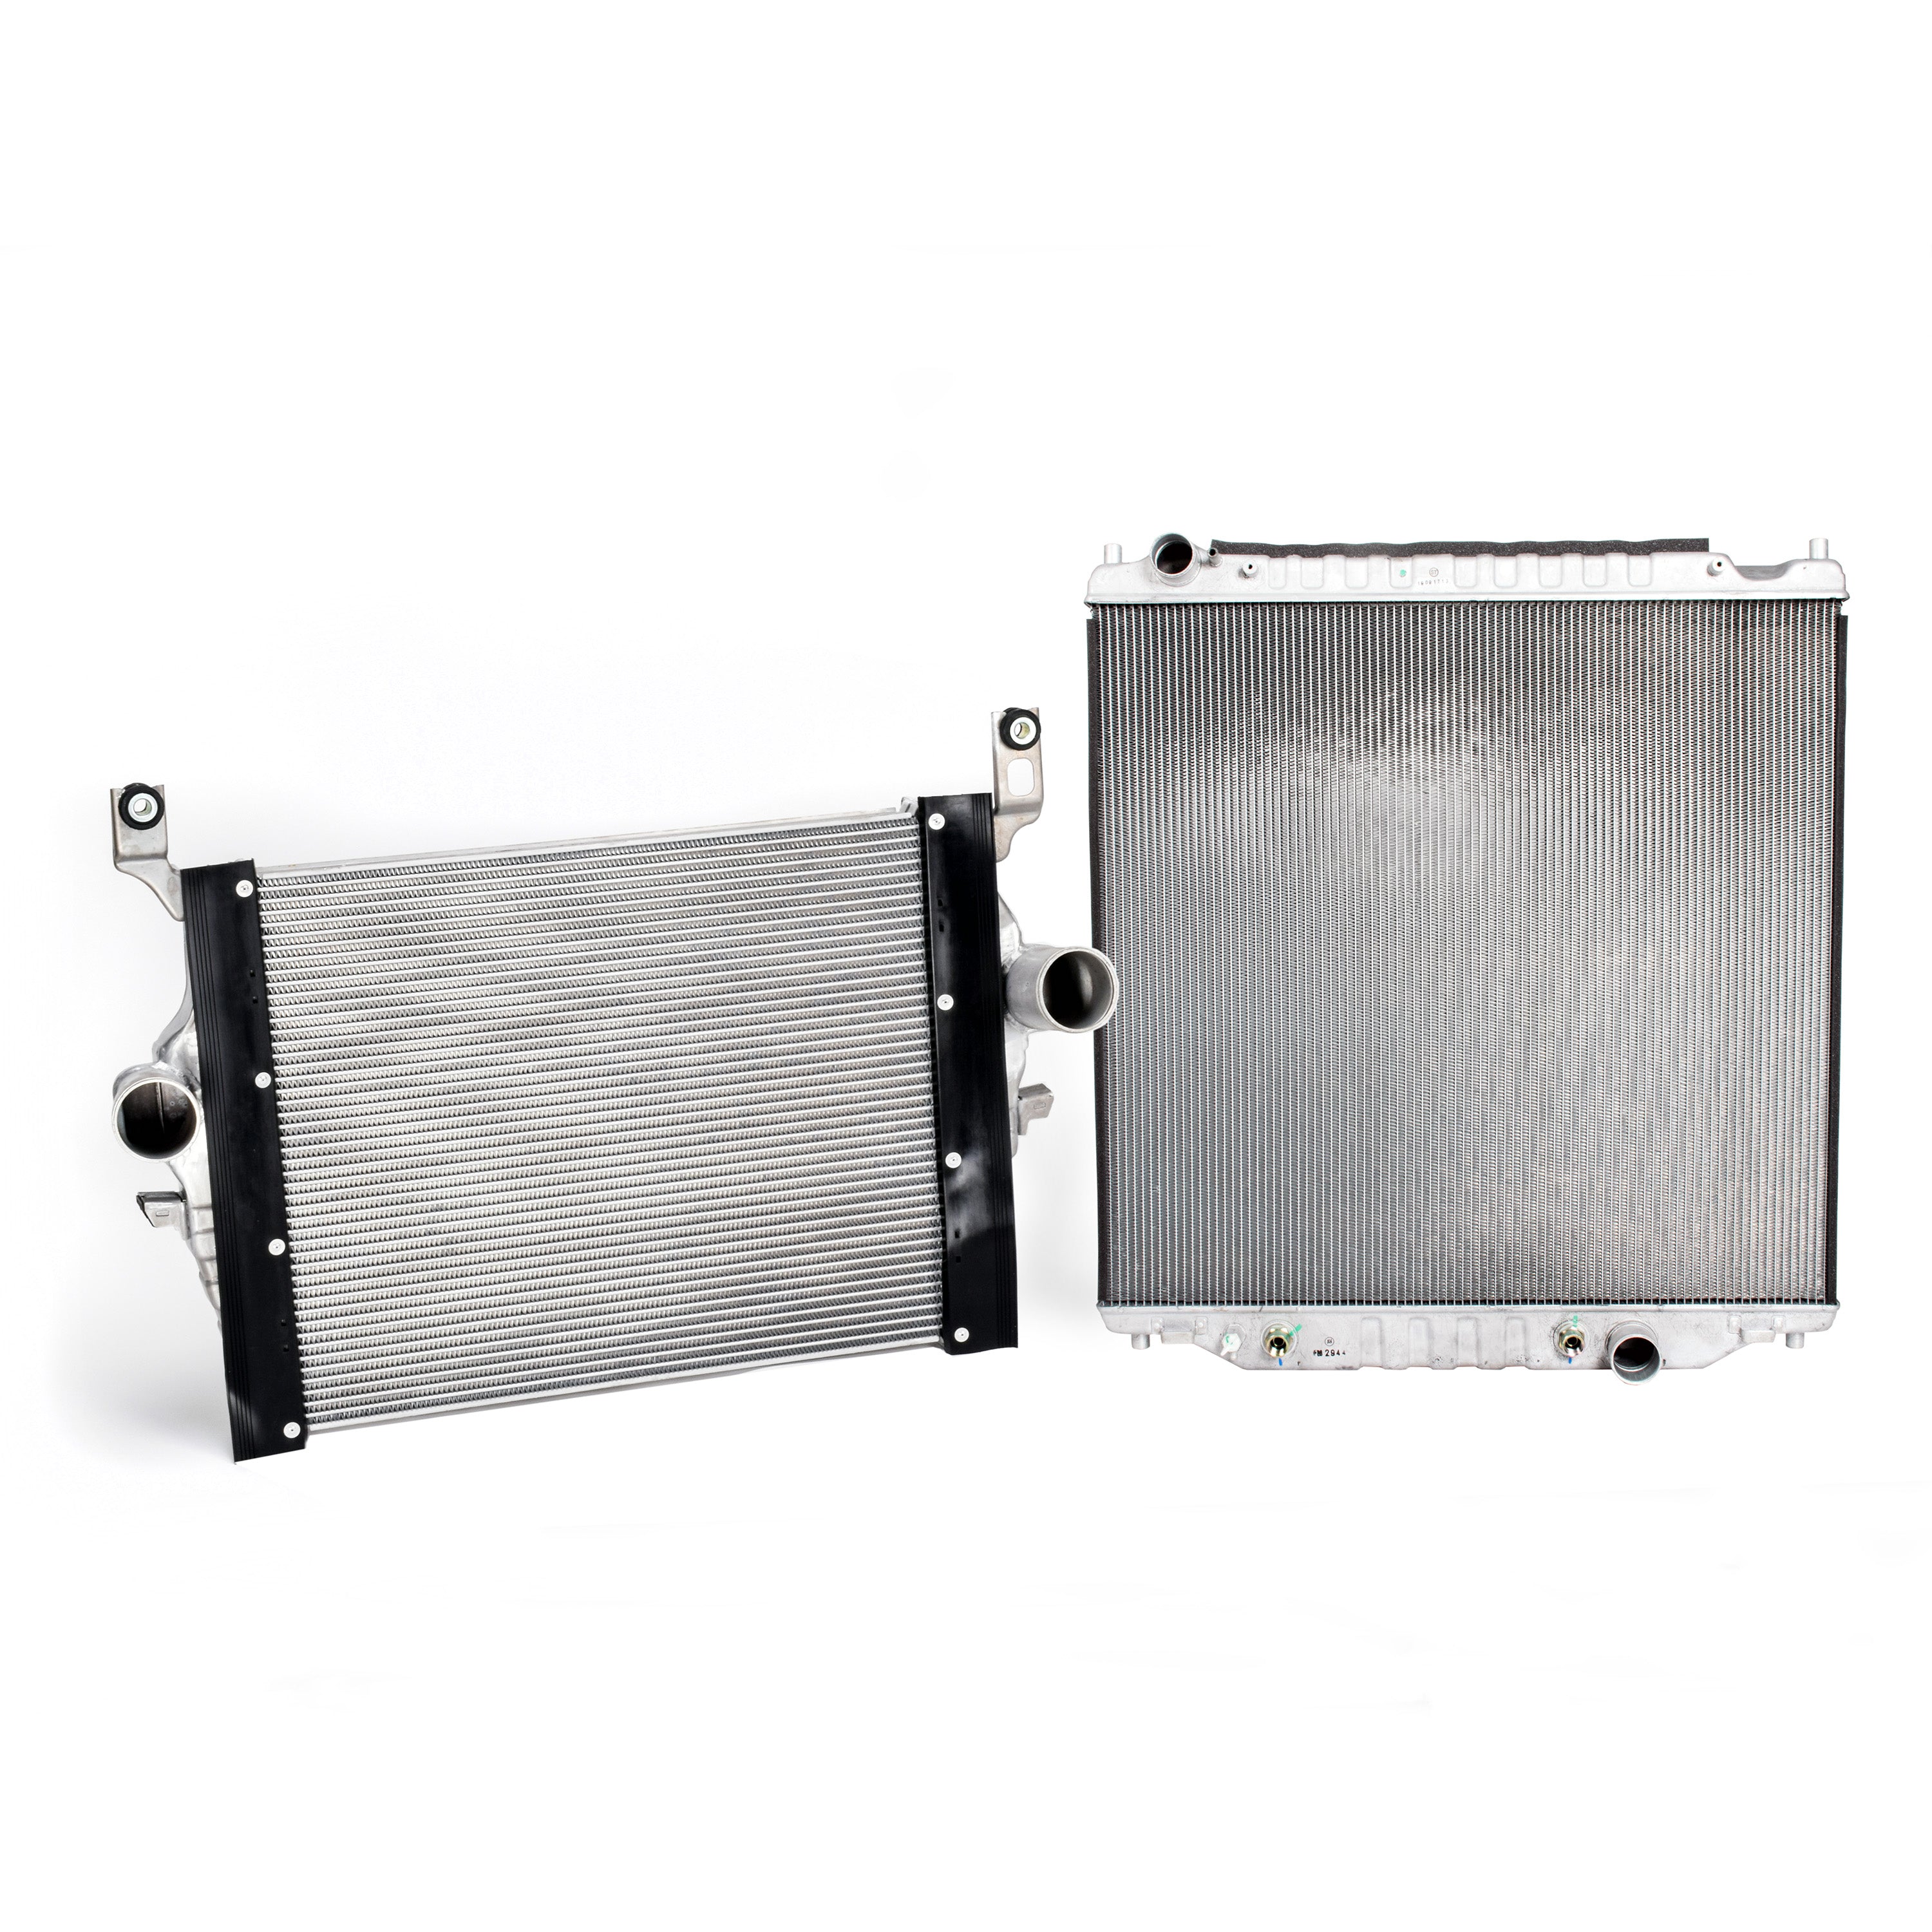 Upgraded aluminum radiator and intercooler fits the 2005, 2006 and 2007 Ford 6.0L Power Stroke Diesel